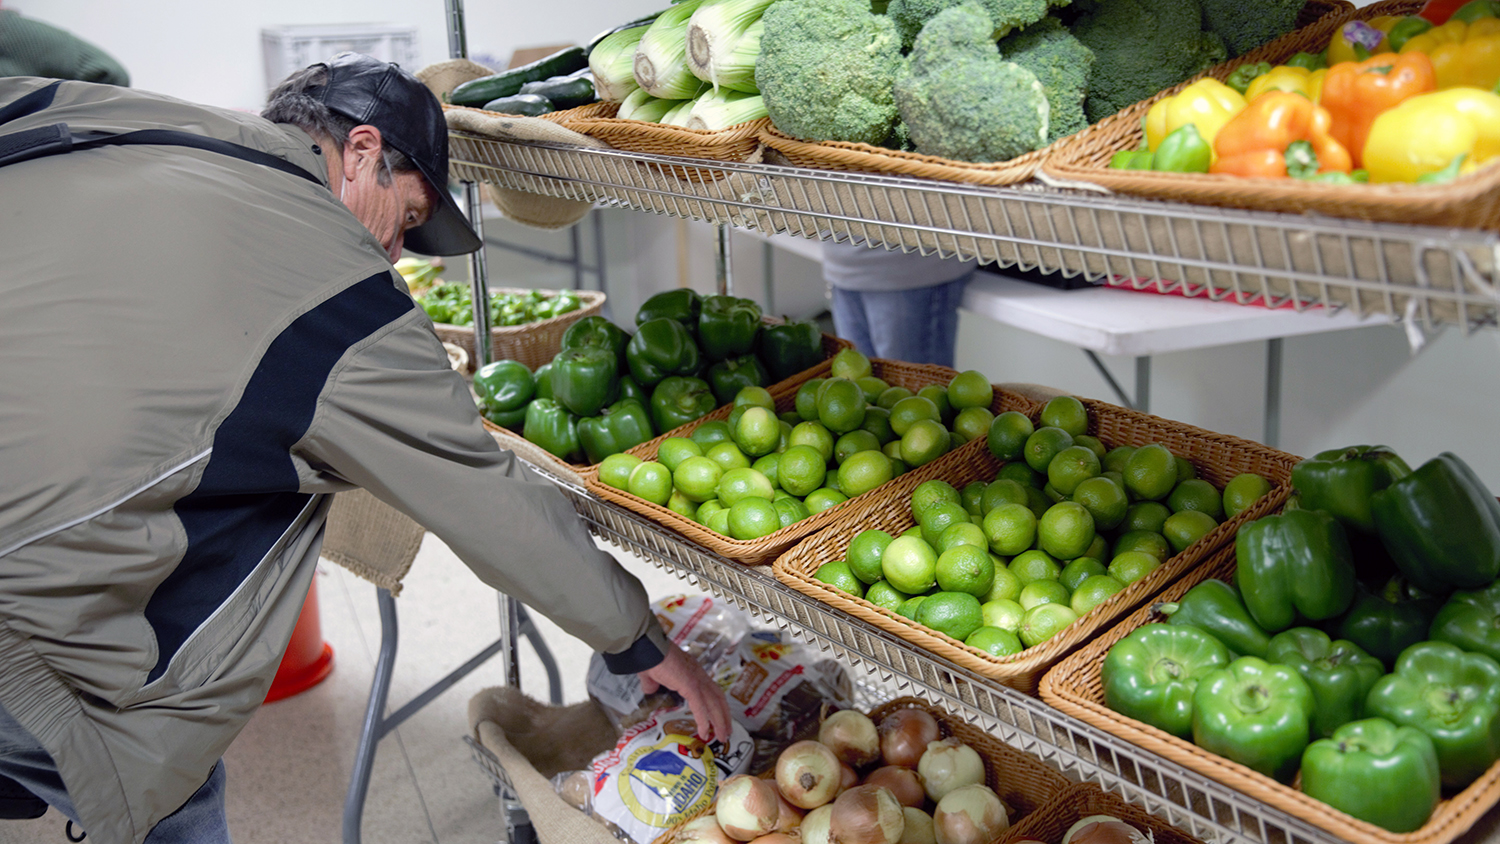 In the center’s market, a man in a gray jacket, who is a Kinship community member, selects onions from wicker baskets on long wire shelves filled with produce, including green peppers, limes, and broccoli.  